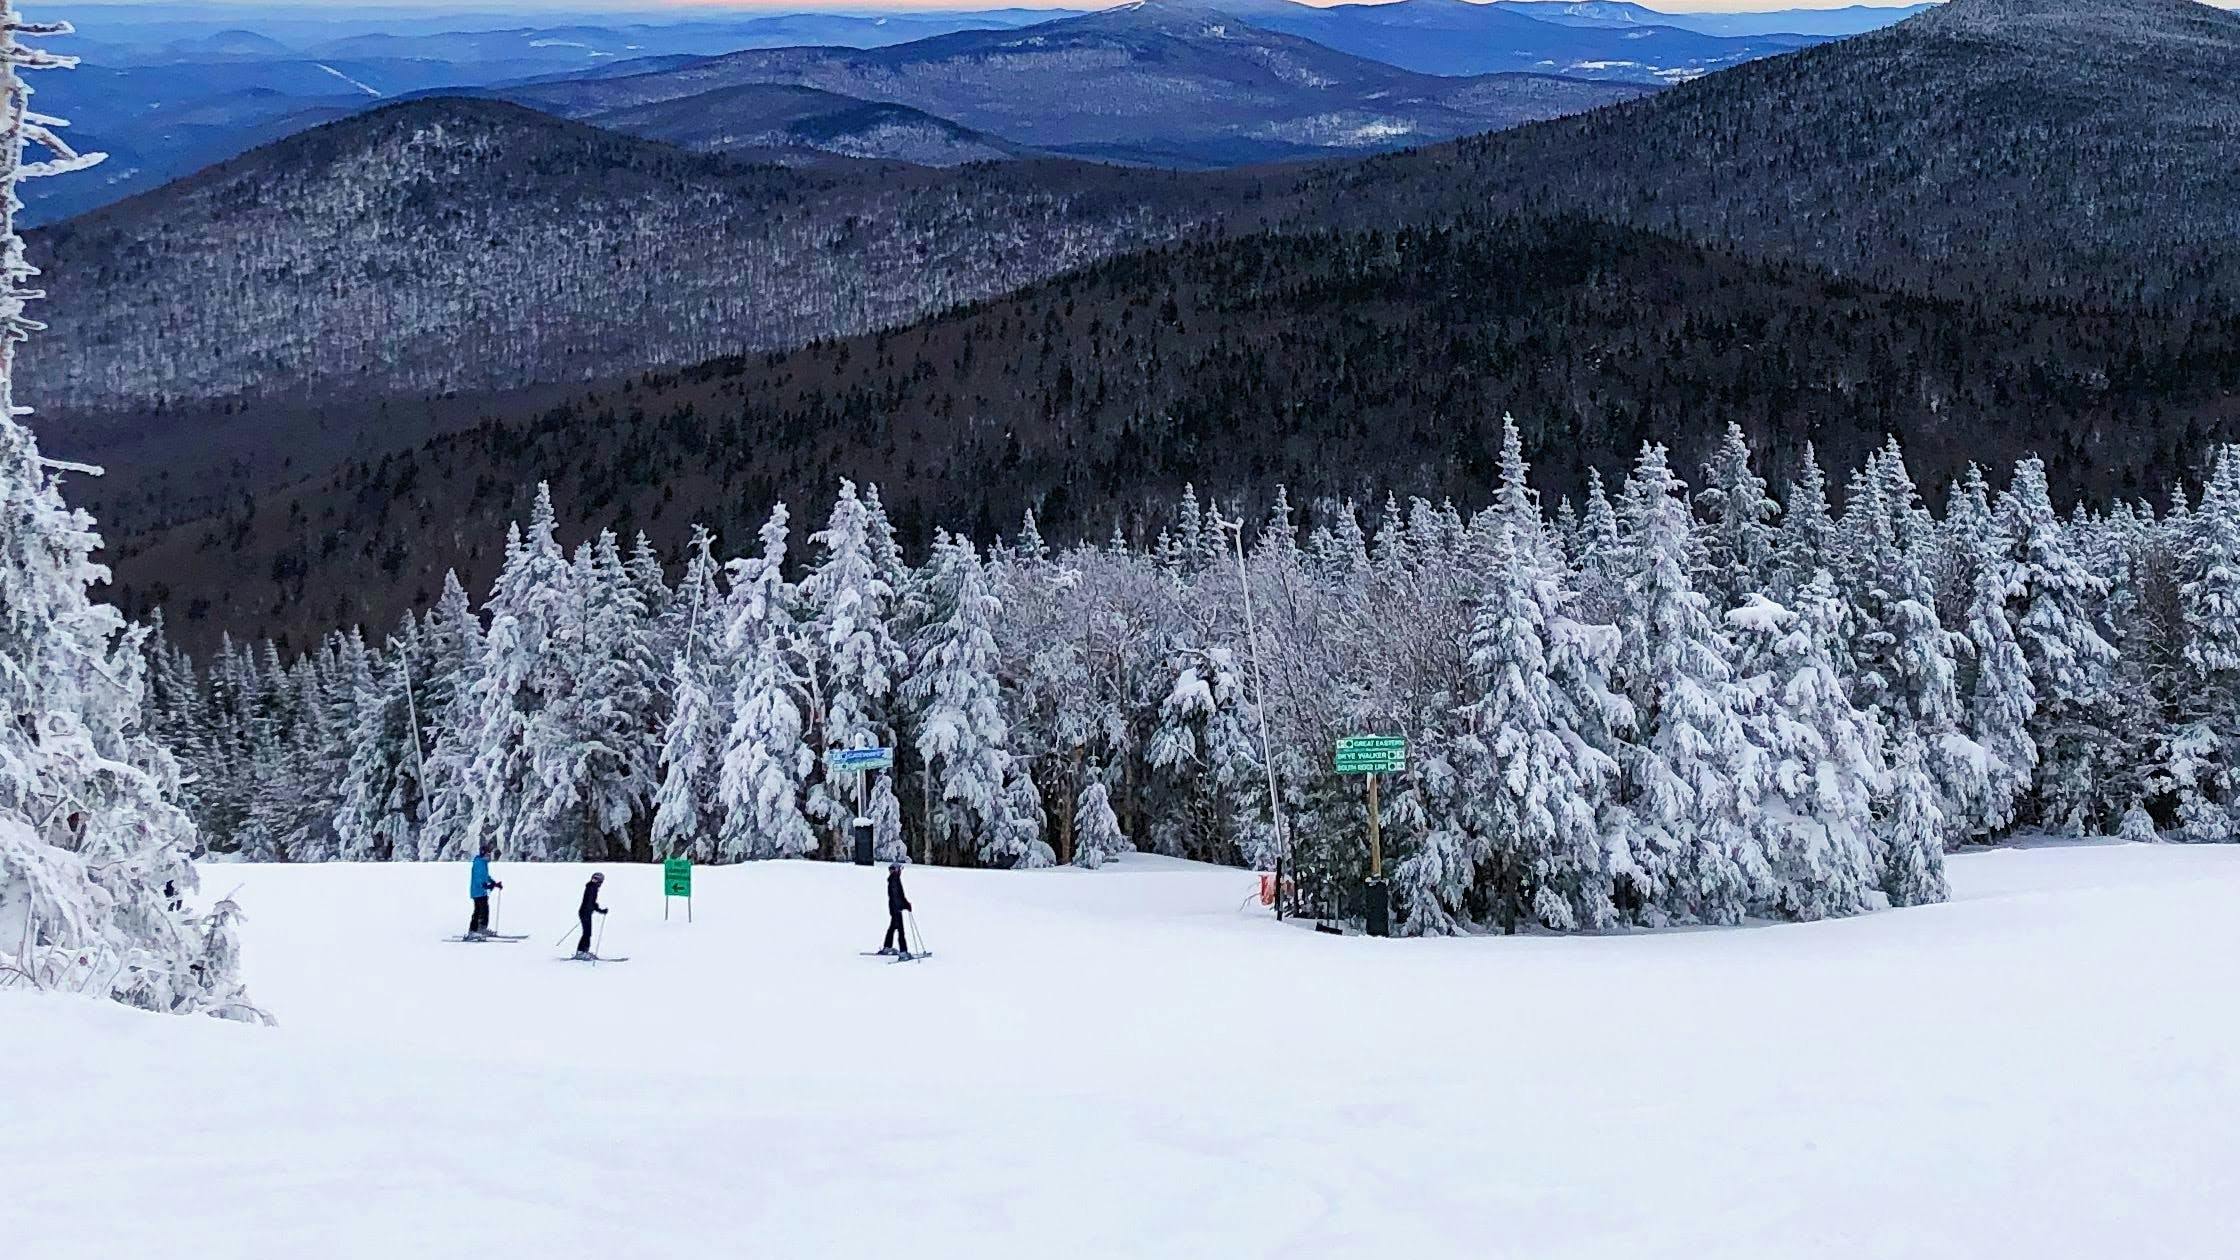 Several skiers standing on the run at a ski resort in Vermont. 